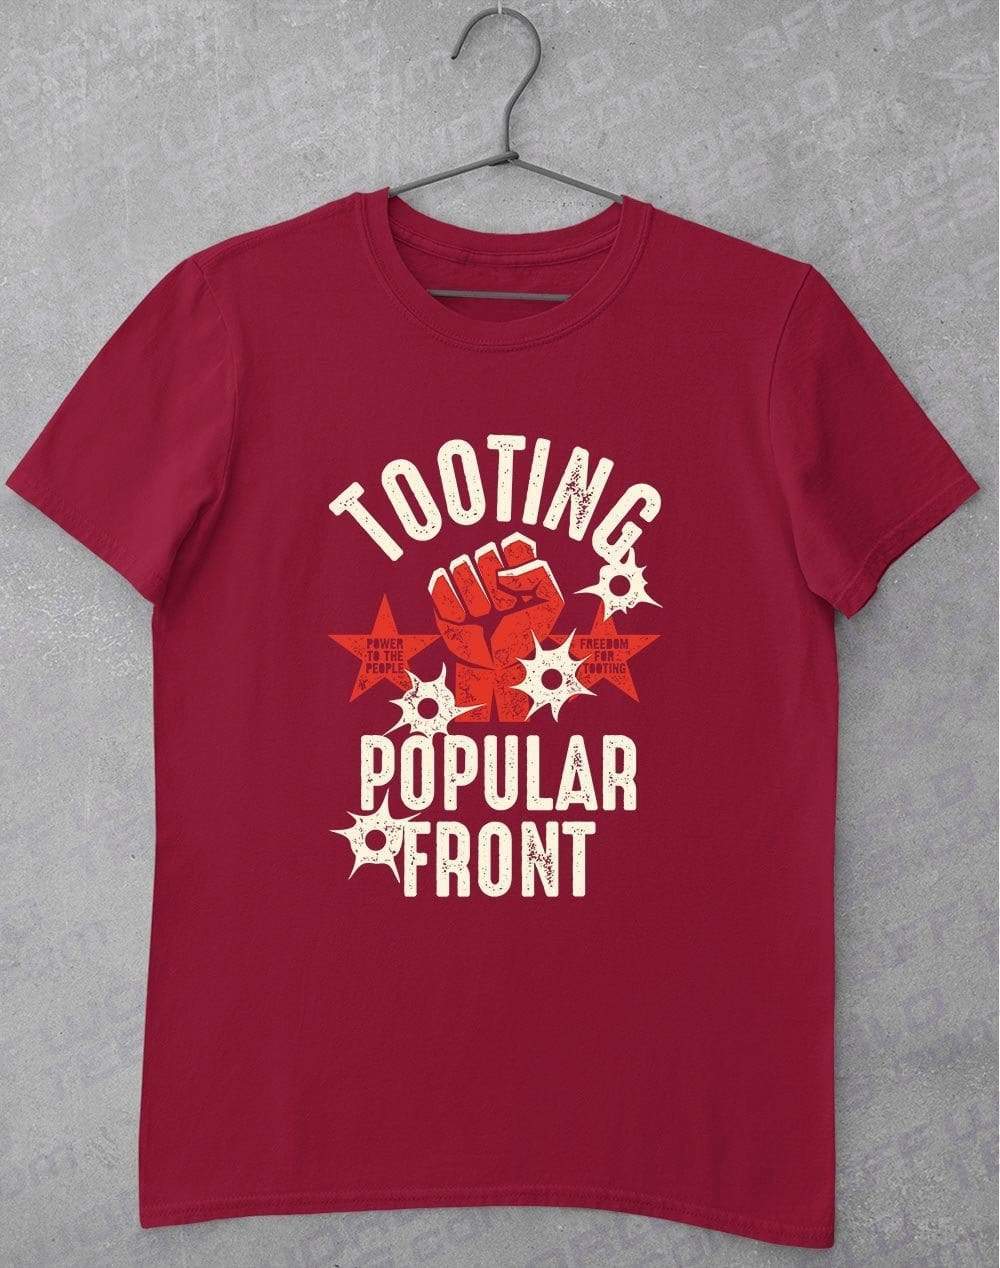 Tooting Popular Front T-Shirt S / Cardinal Red  - Off World Tees